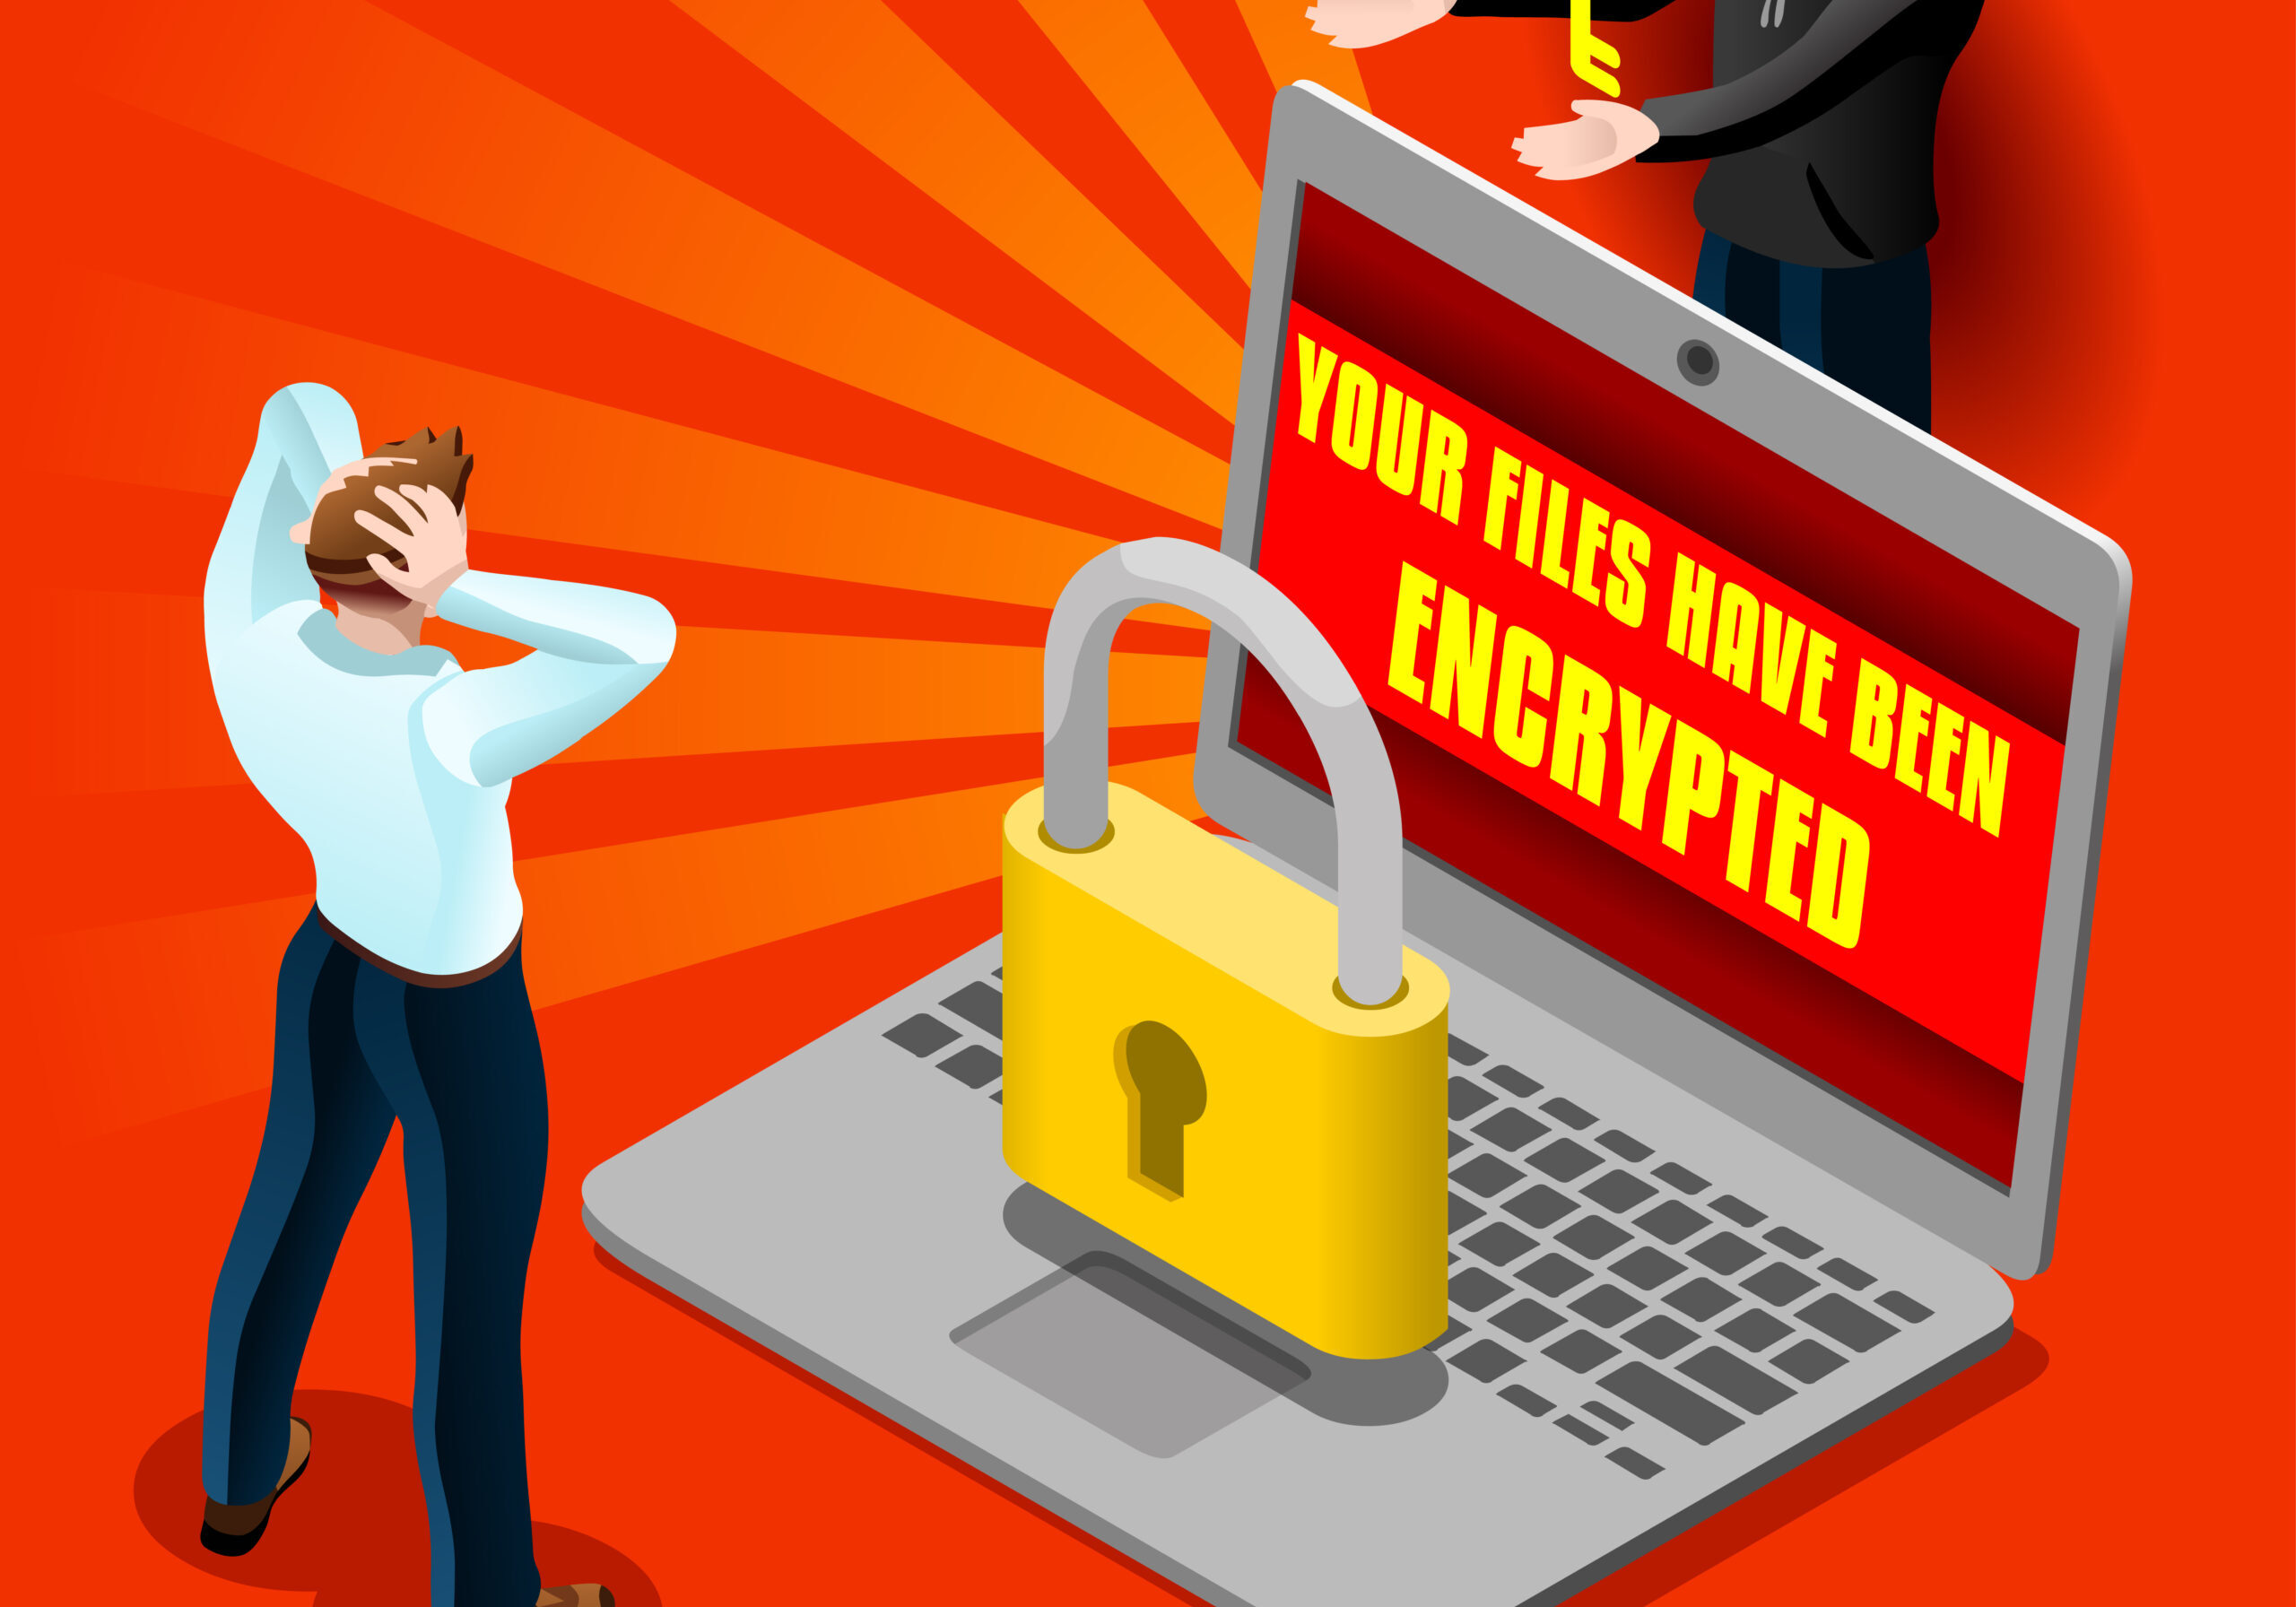 Ransomware malware wannacry symbol cyber attack concept computer infection infographic. Vector illustration with 3D flat isometric realistic detailed people